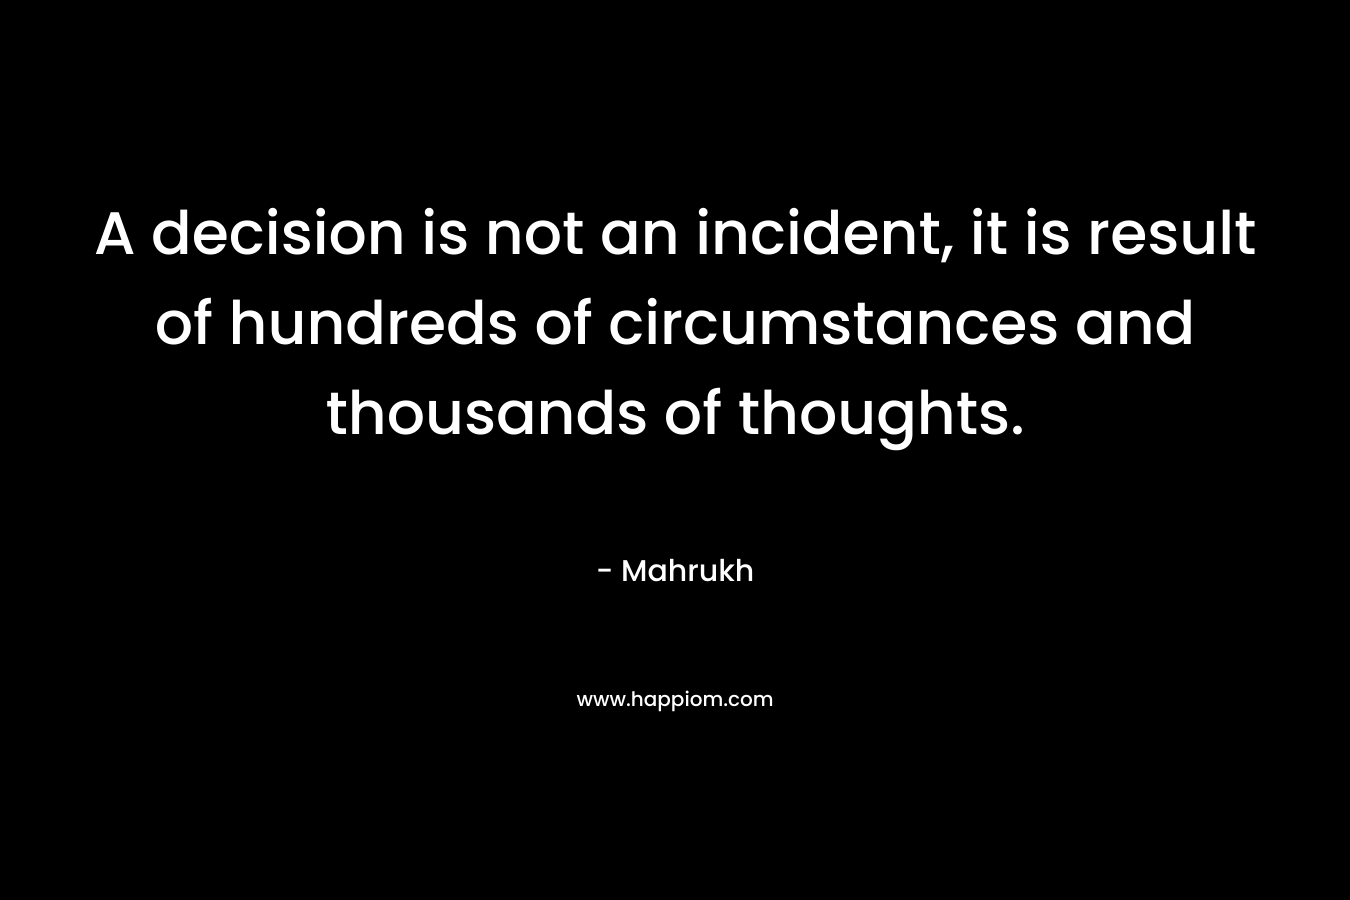 A decision is not an incident, it is result of hundreds of circumstances and thousands of thoughts.